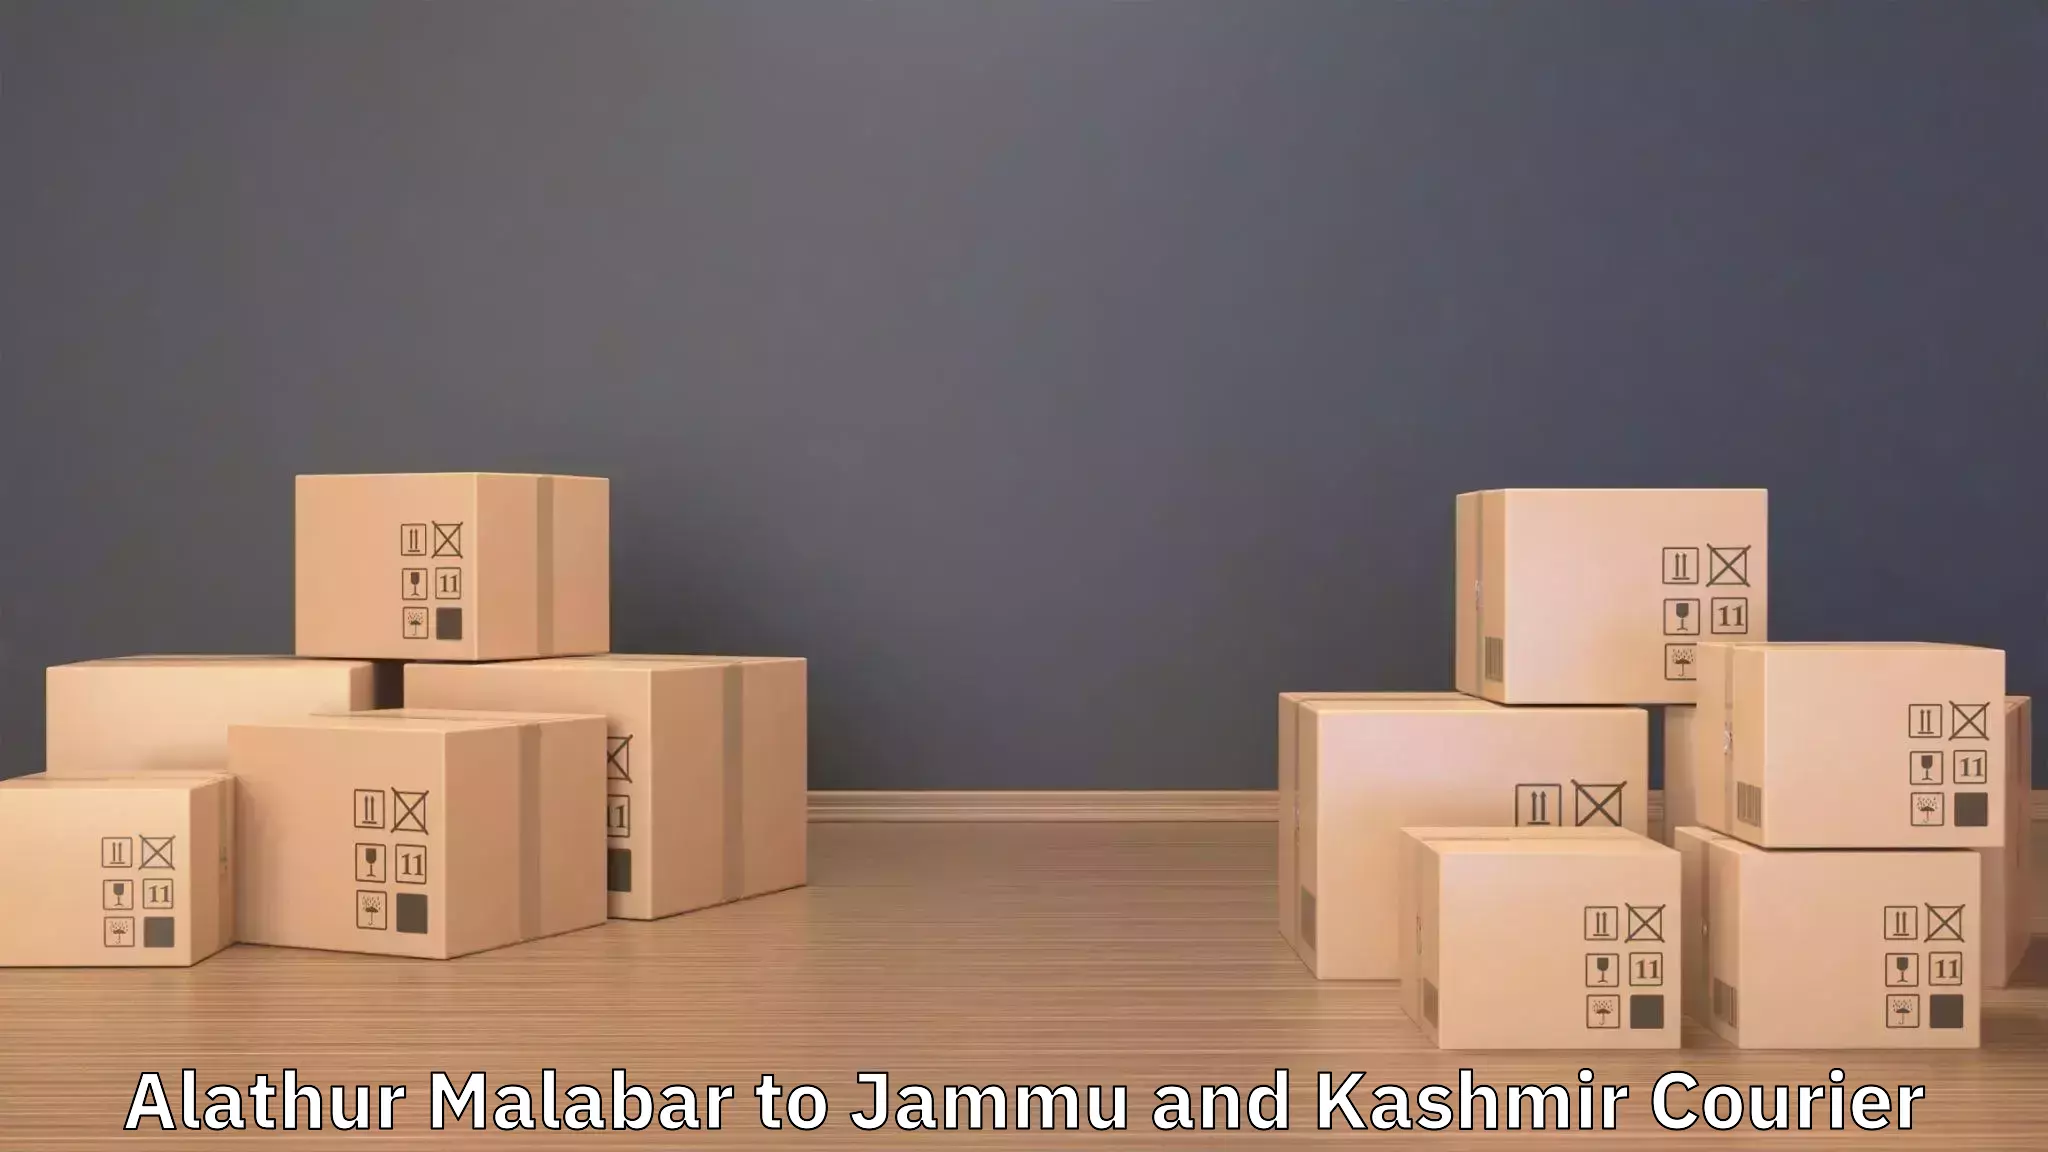 Home moving specialists Alathur Malabar to Jammu and Kashmir